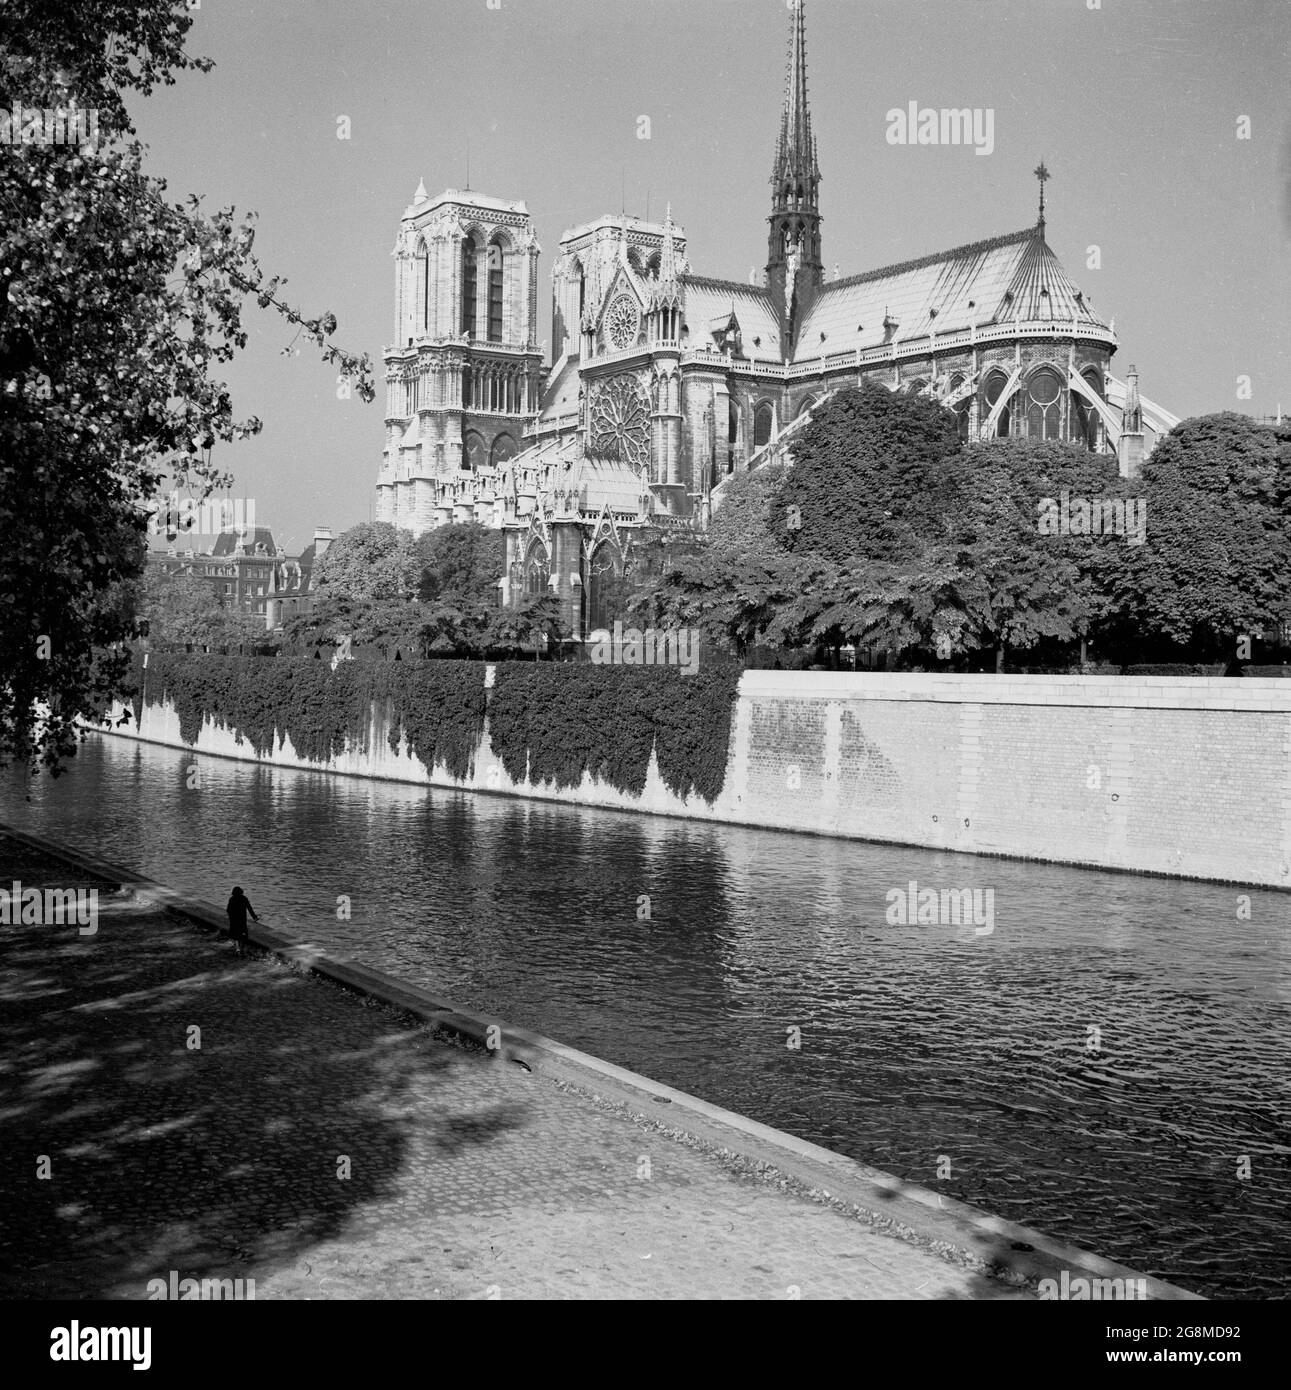 1950s, historical, Notre-dame Catherdral, Paris, France. A medieval Catholic church on the IIe de la Cite in the 4th arrondissement of Paris, it is considered one of the finest examples of French Gothic architecture. Stock Photo